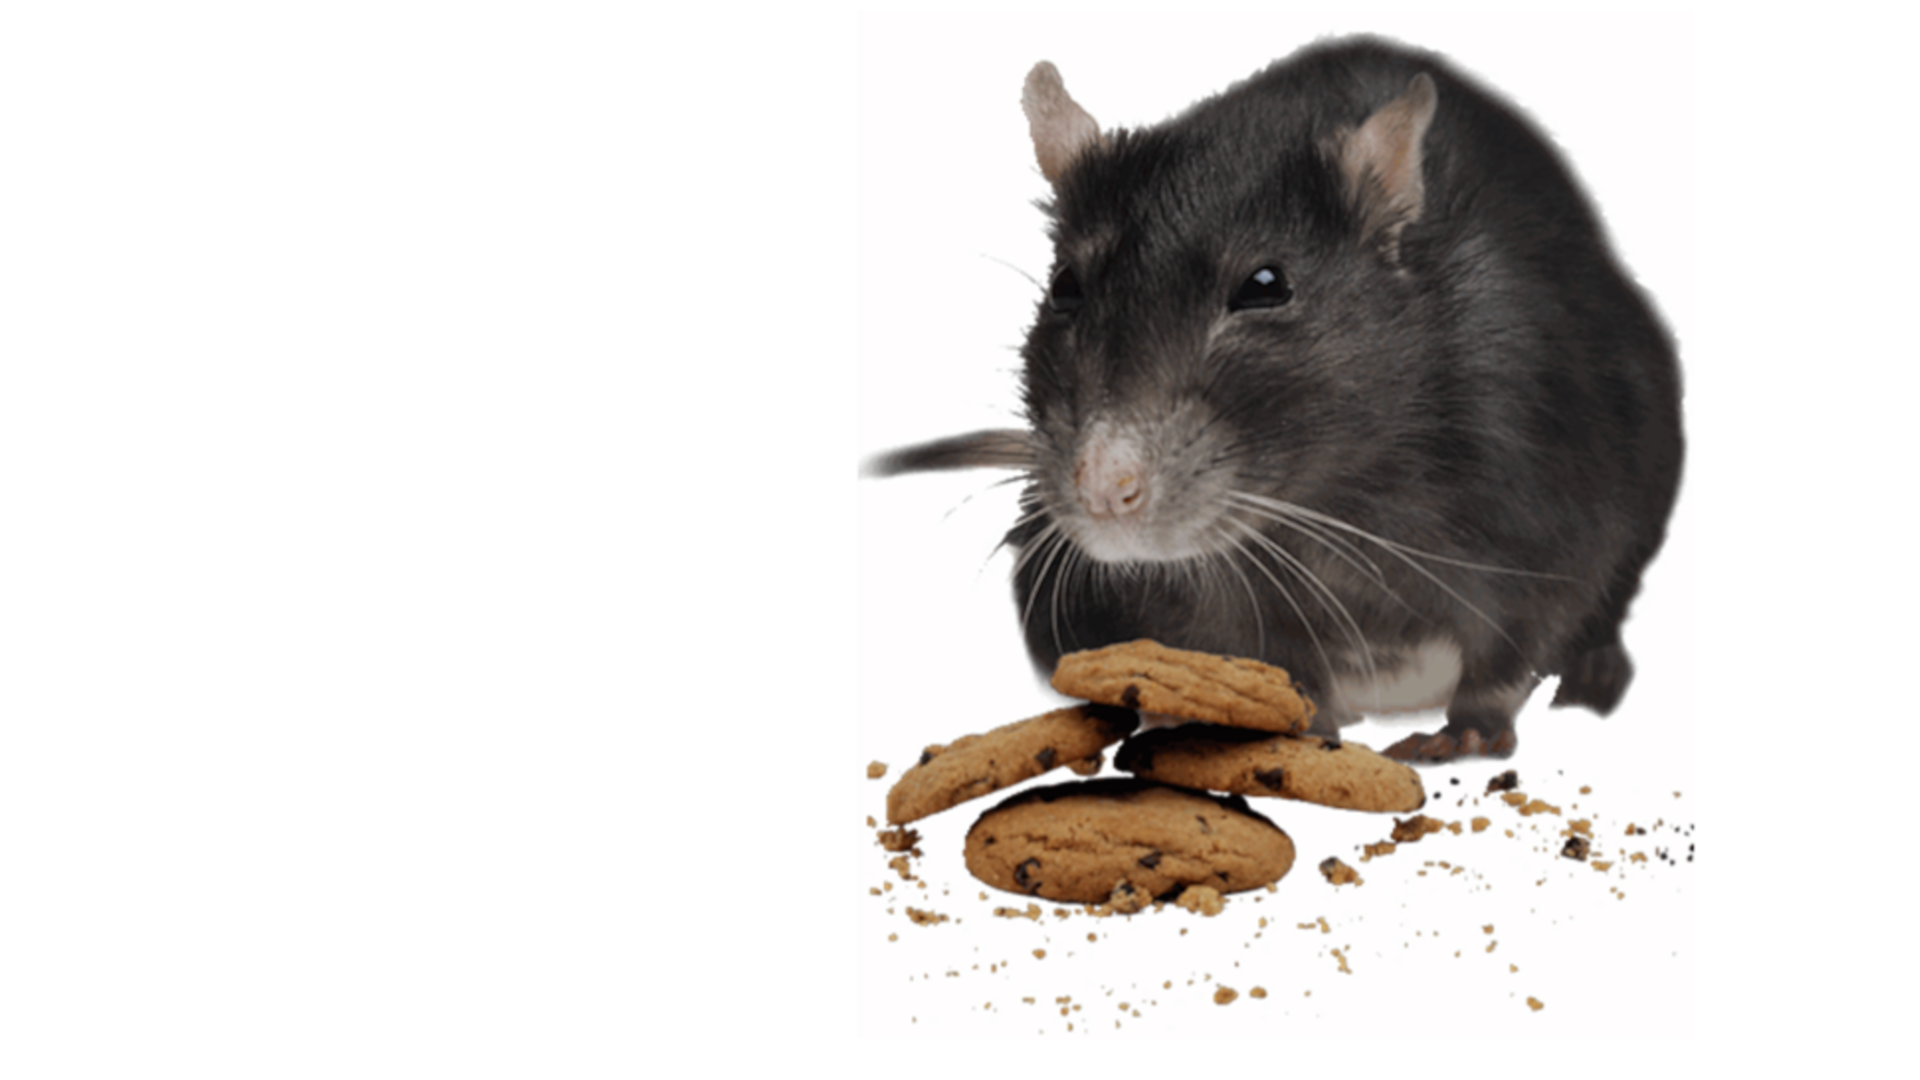 Mouse and cookies